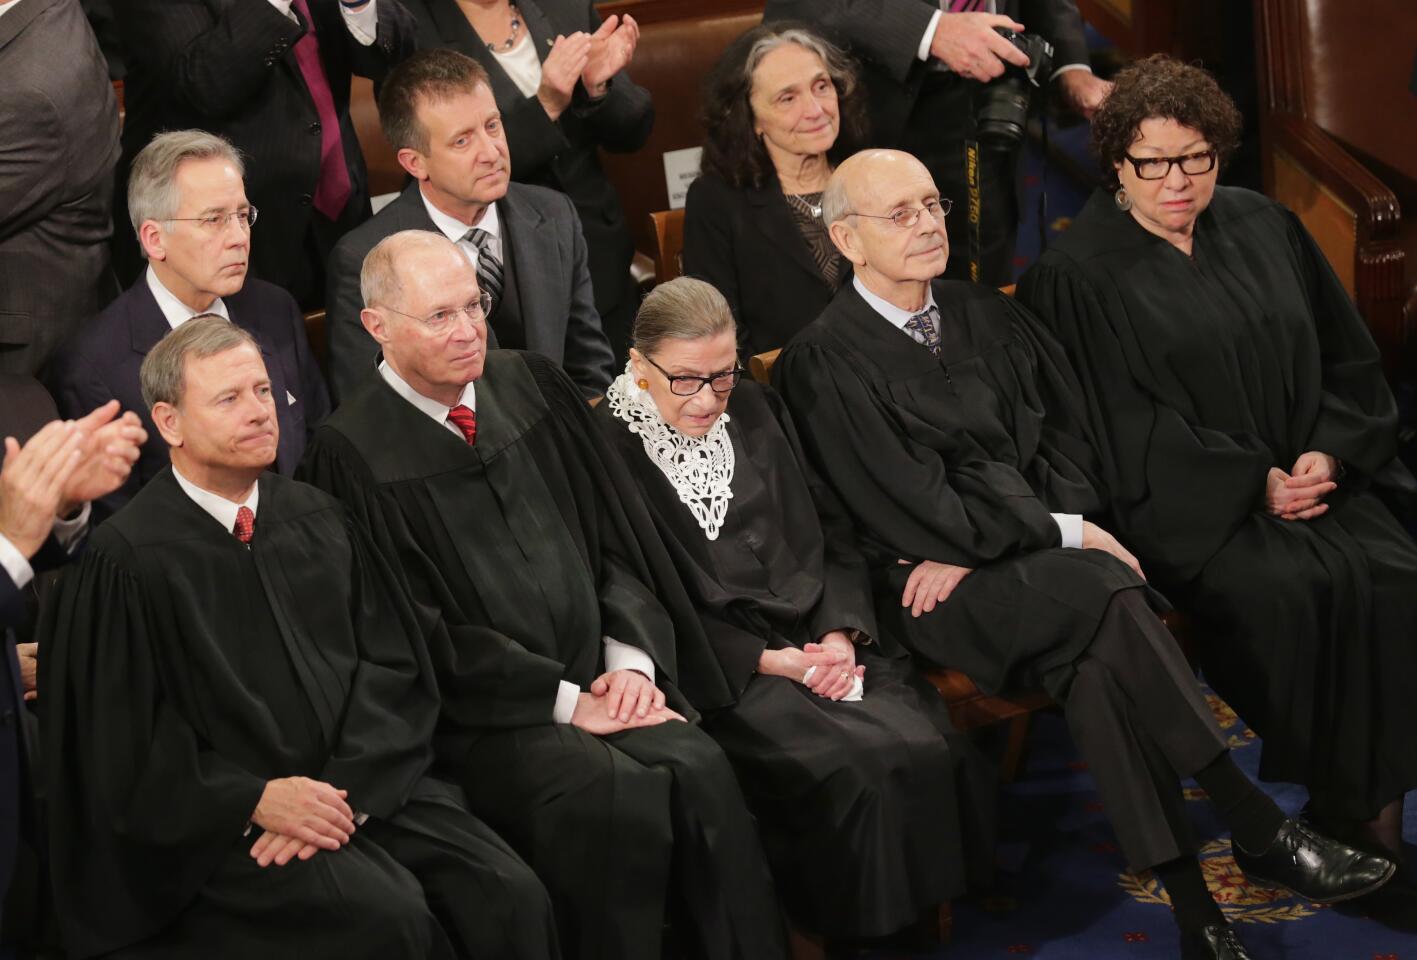 Supreme Court justices wearing black robes sit on a bench in the House chamber during the State of the Union